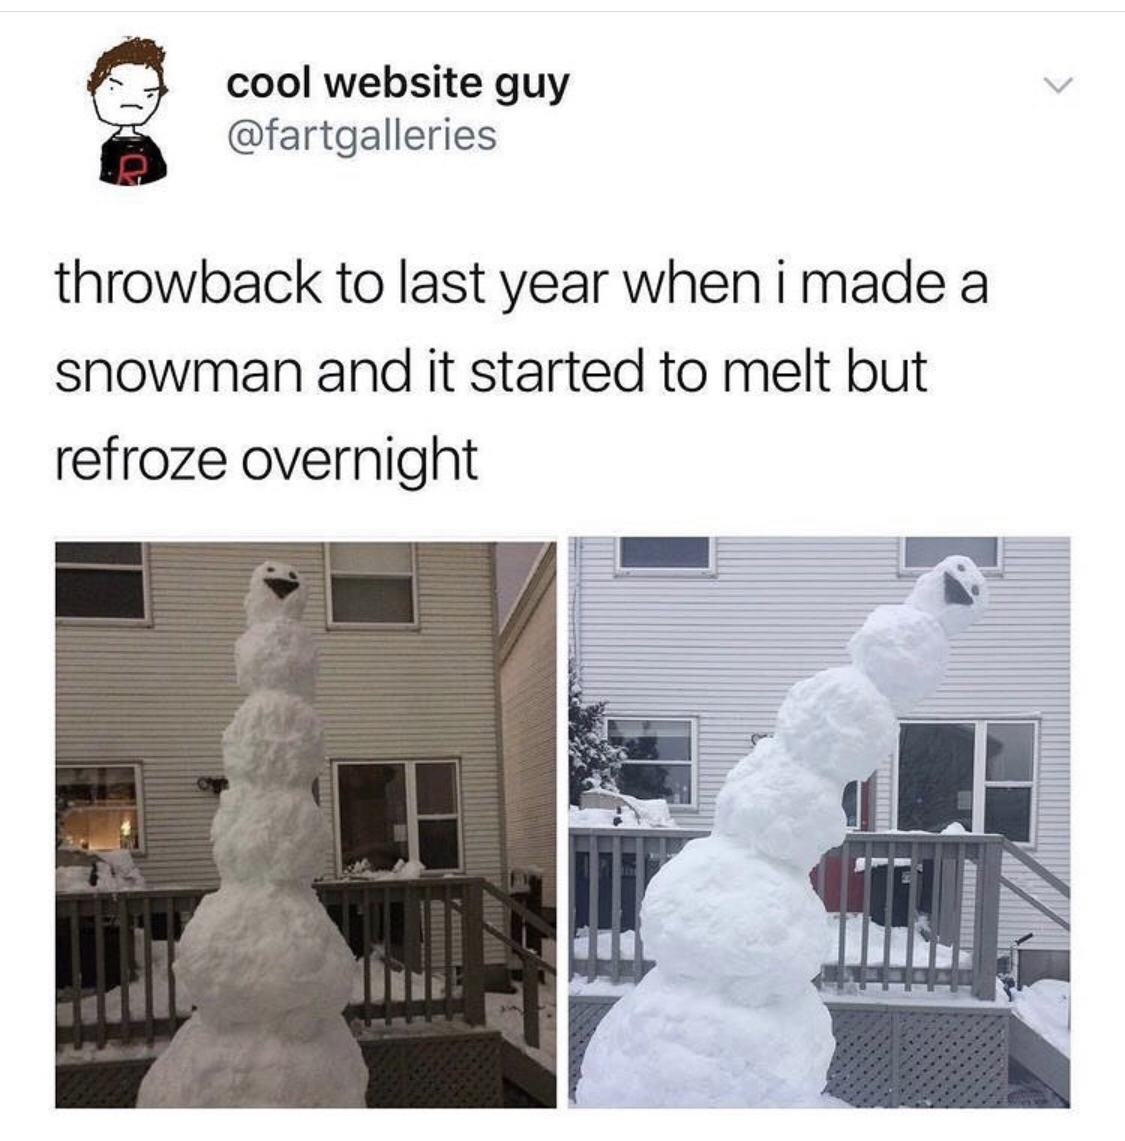 snowman centipede - cool cool website guy throwback to last year when i made a snowman and it started to melt but refroze overnight